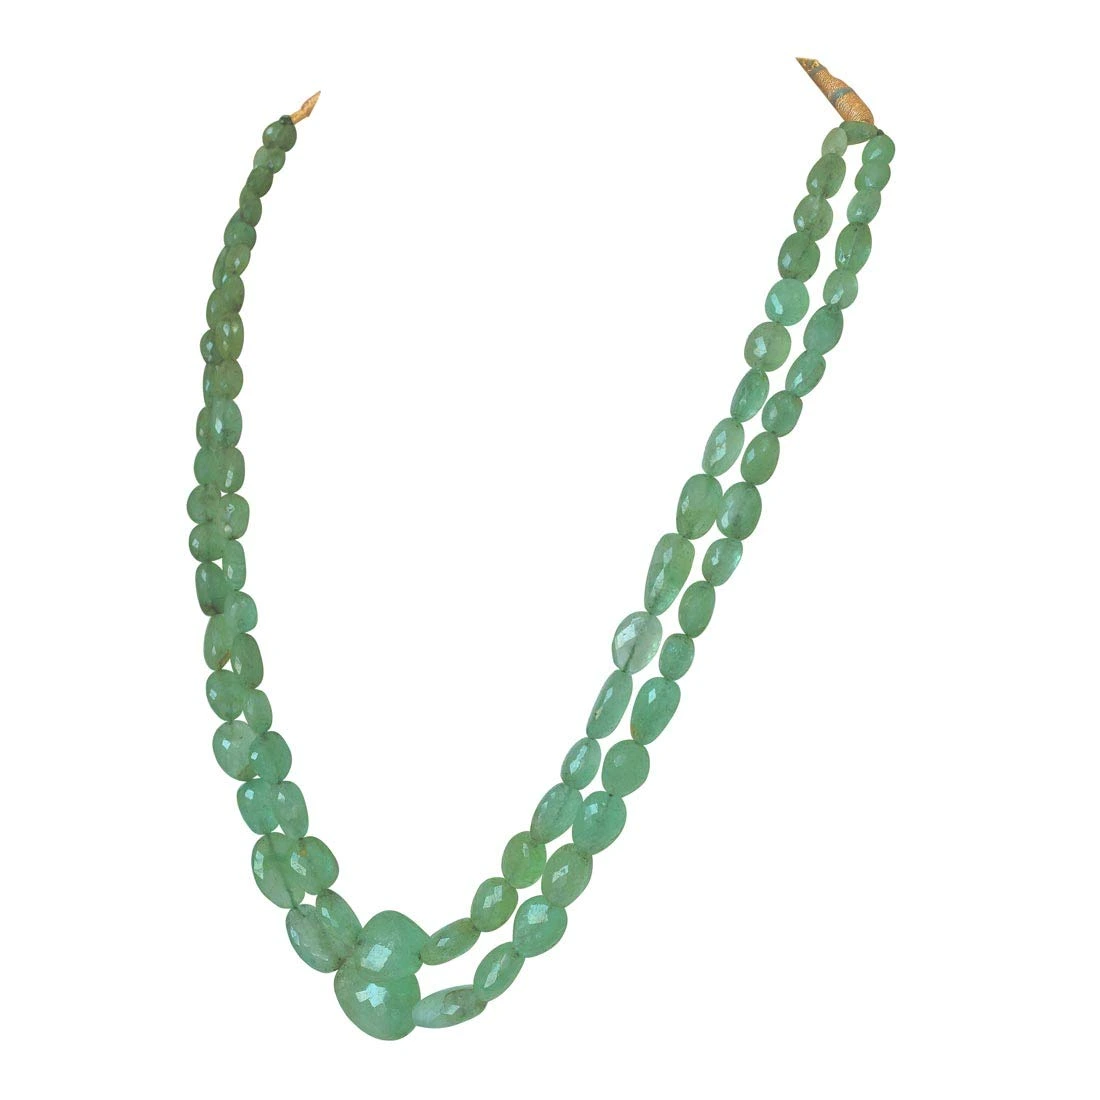 Two Line 243.77cts REAL Natural Light Green Oval Faceted Emerald Necklace for Women (243.77cts EMR Neck)